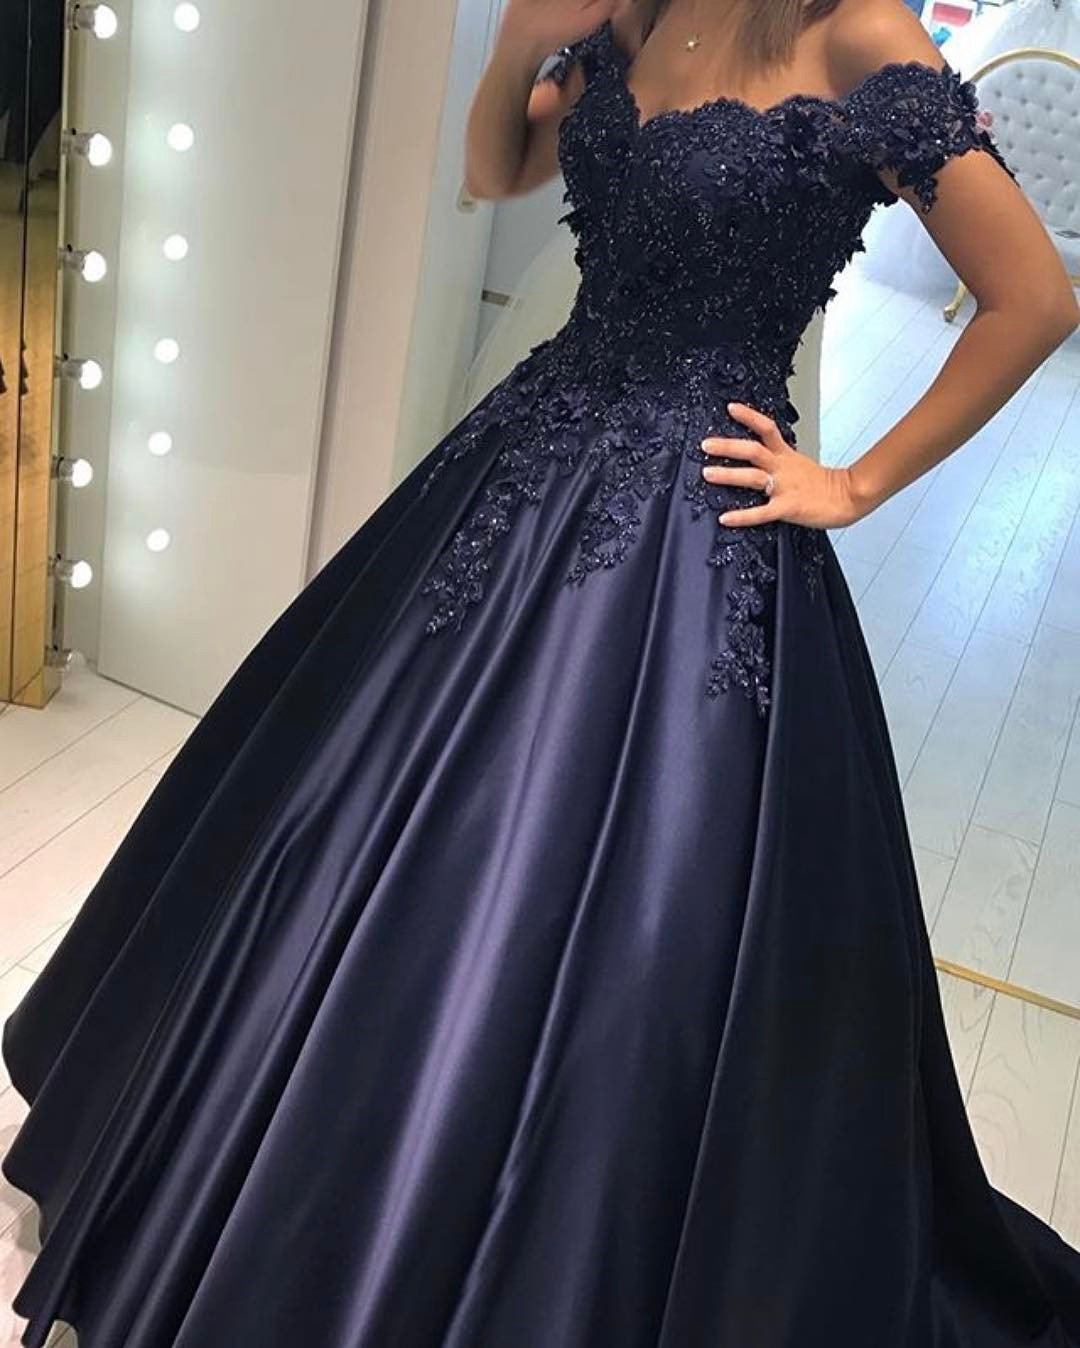 Lace Flower Off The Shoulder Satin Prom Dresses Ball Gowns A-line Sweep Train Navy Blue Prom Dress With Appliques Beading